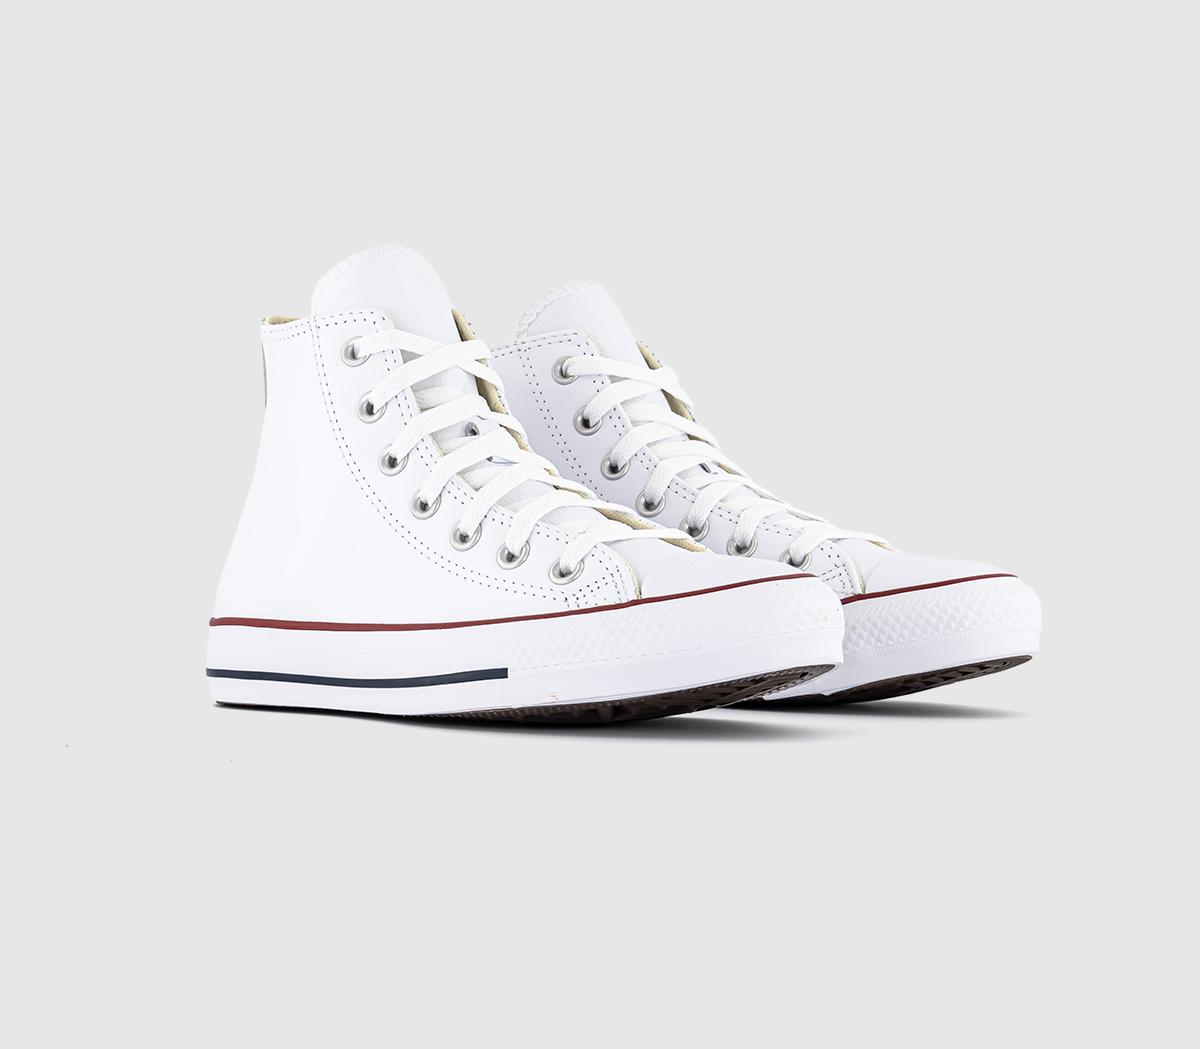 Converse All Star High White Leather Trainers, 7